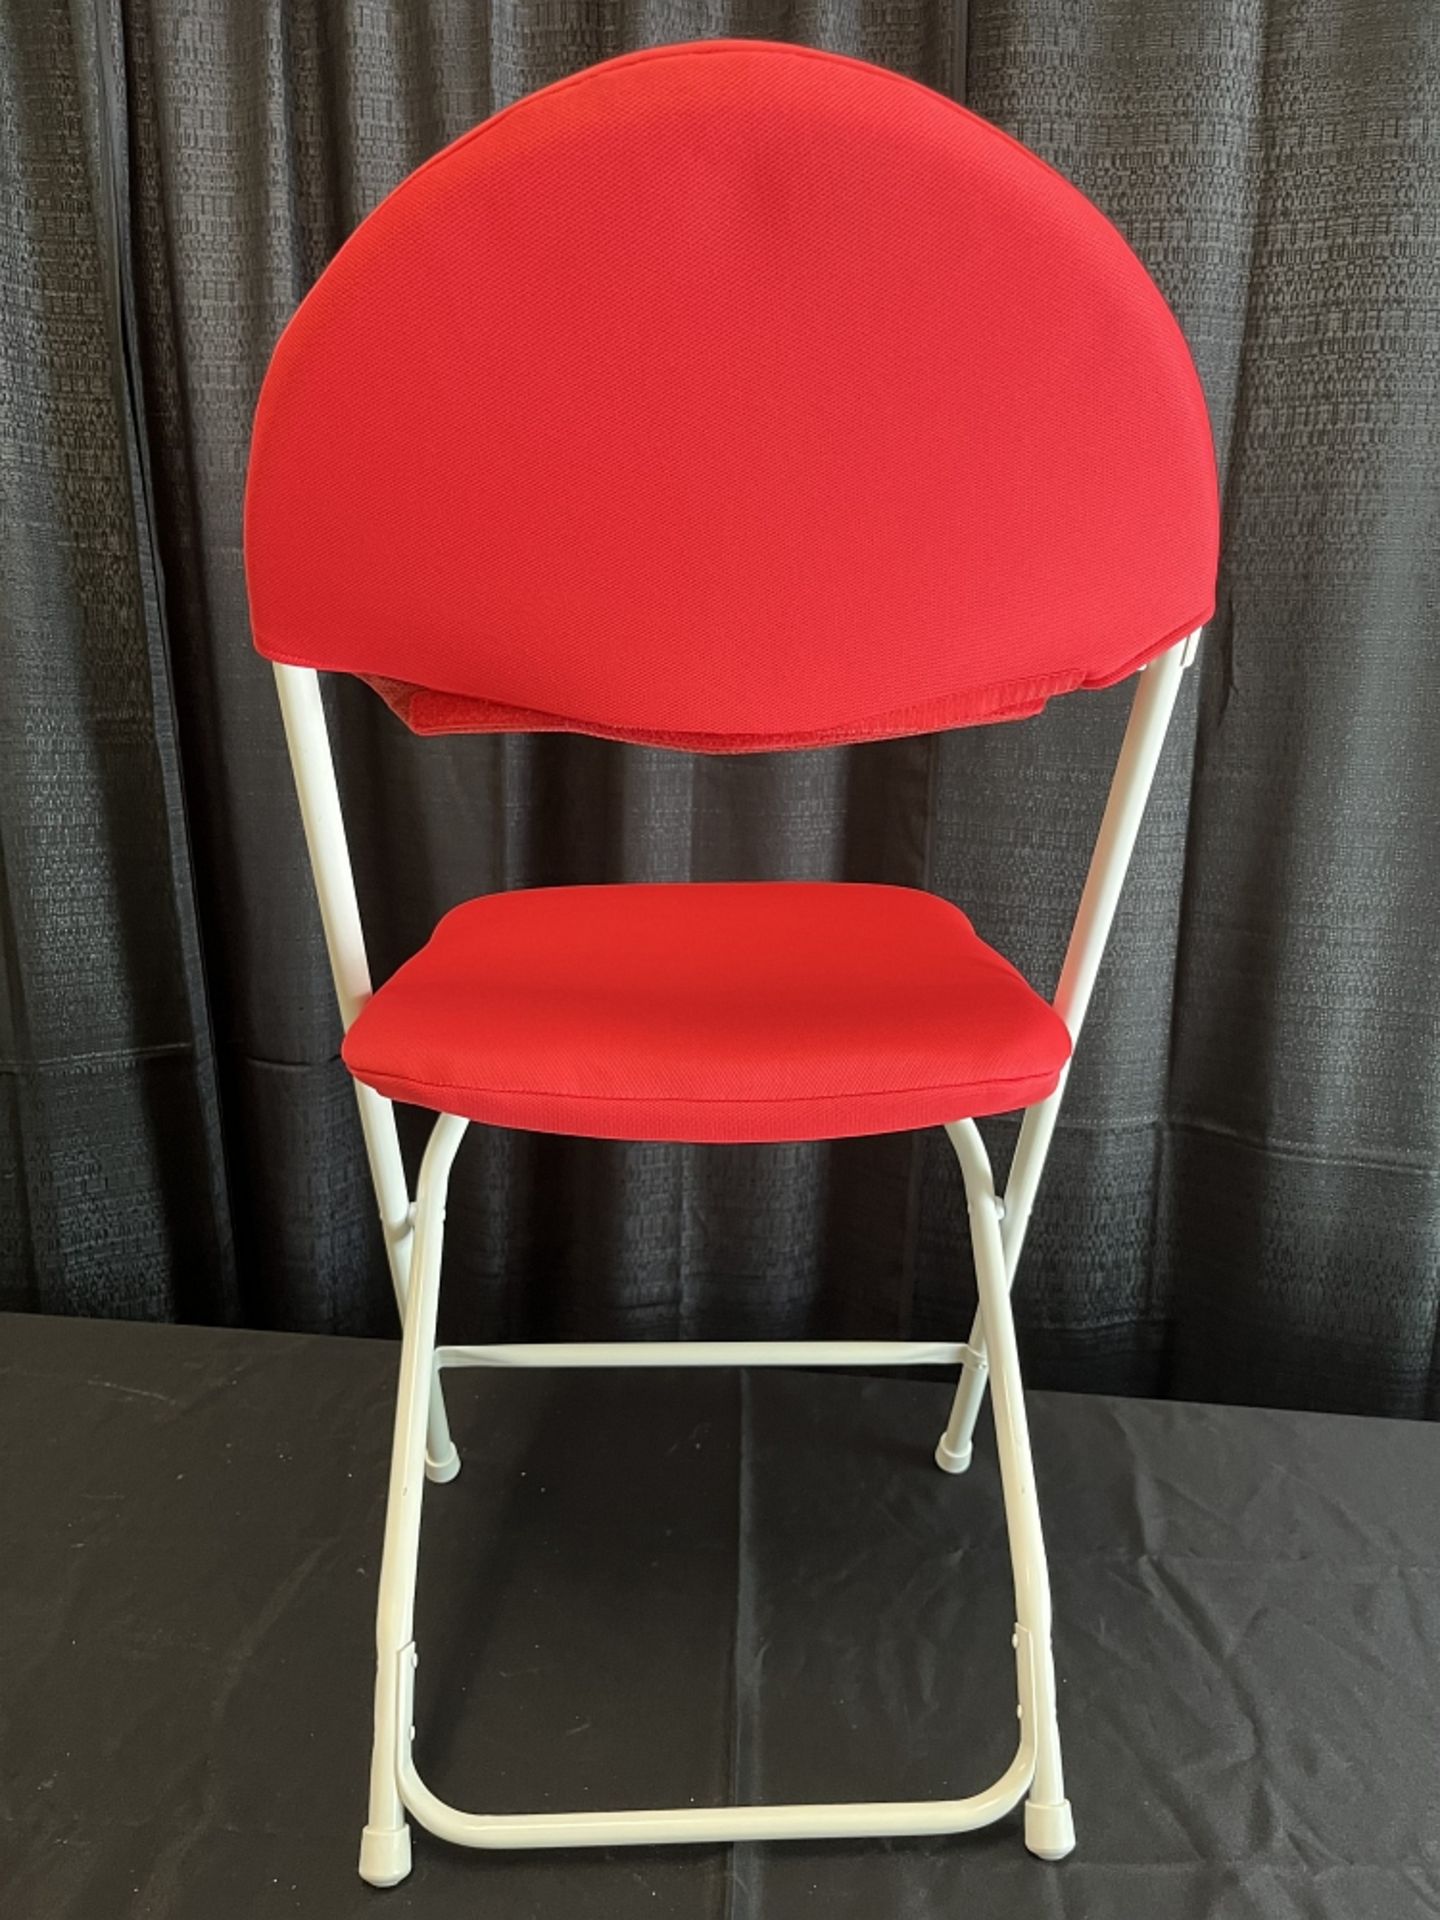 Chair Pad- FanBack color: Red - Image 2 of 2